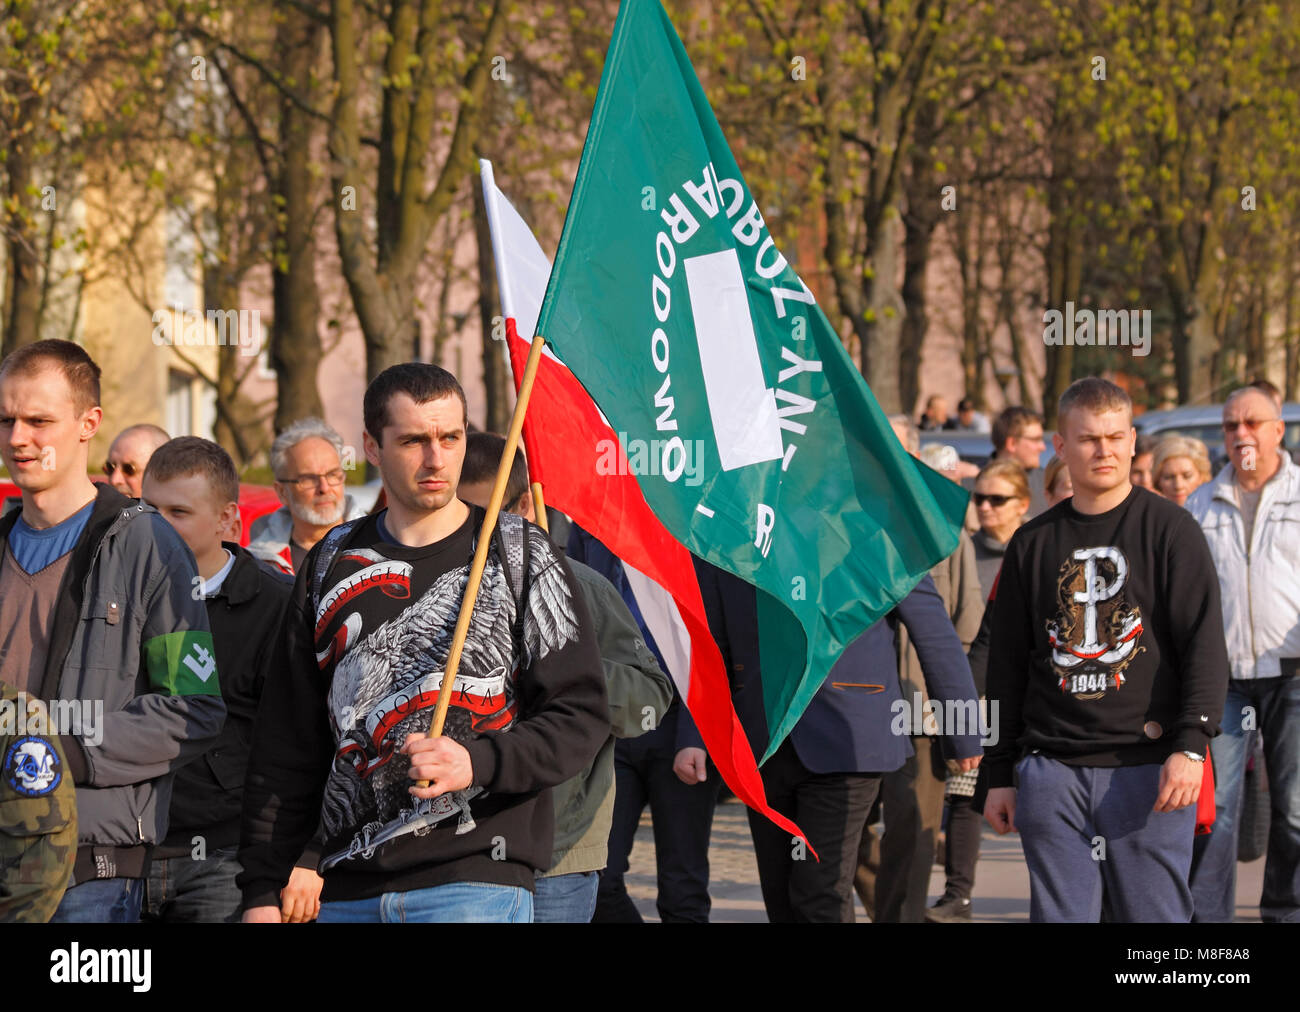 3rd Kielce Memory March at celebration 76th anniversary of Katyn massacre (The 1940 massacre of Polish officers, police officers and civilians) Stock Photo